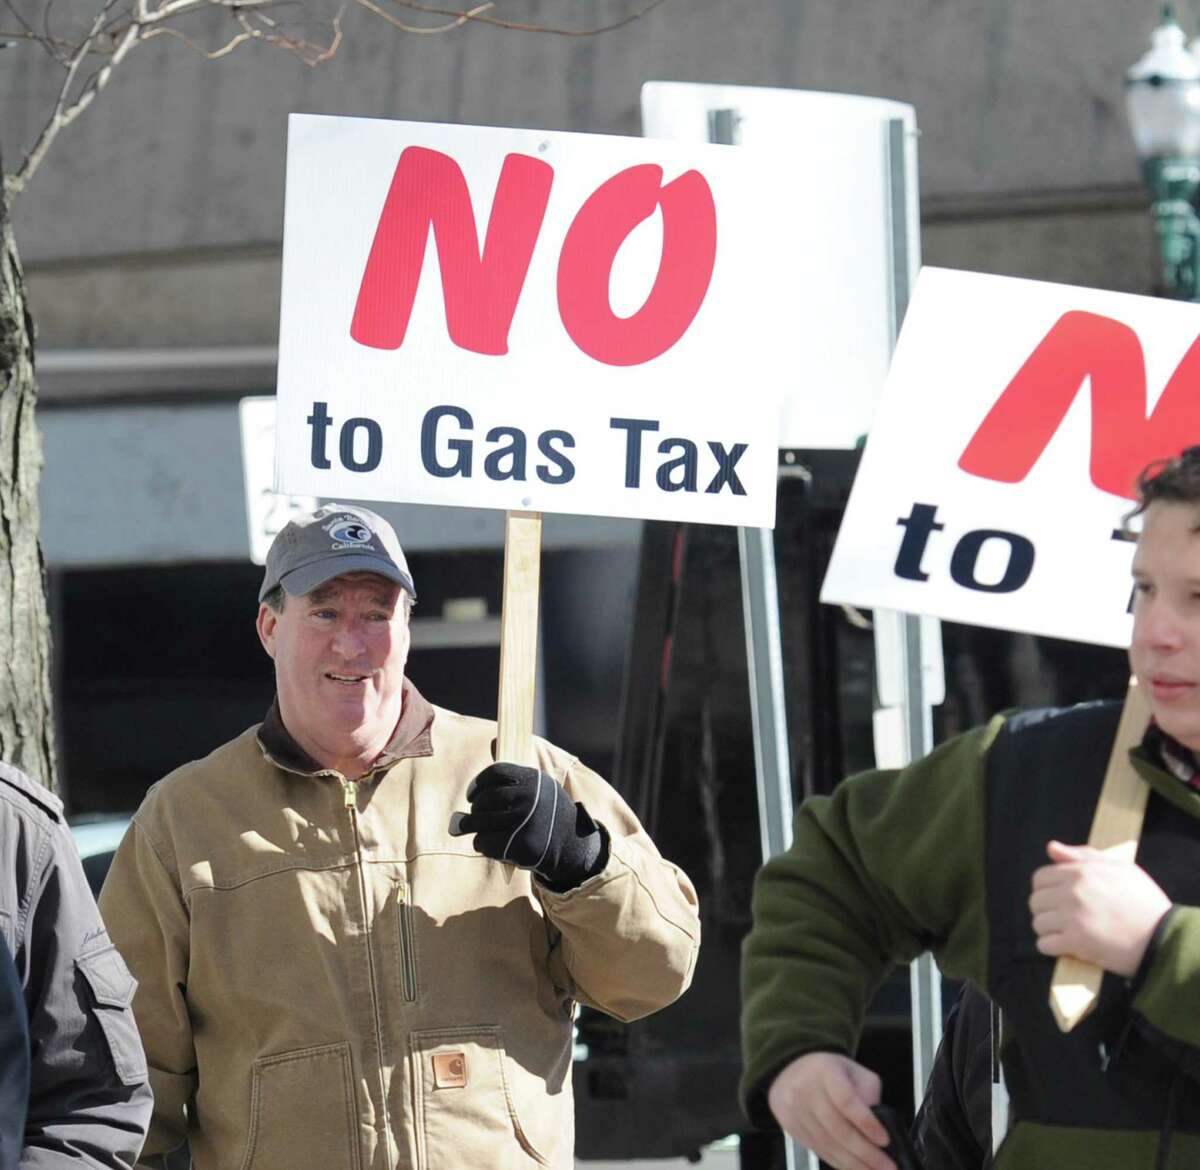 Public protests against tolls are held in front of the Stamford Goverment Center last year.